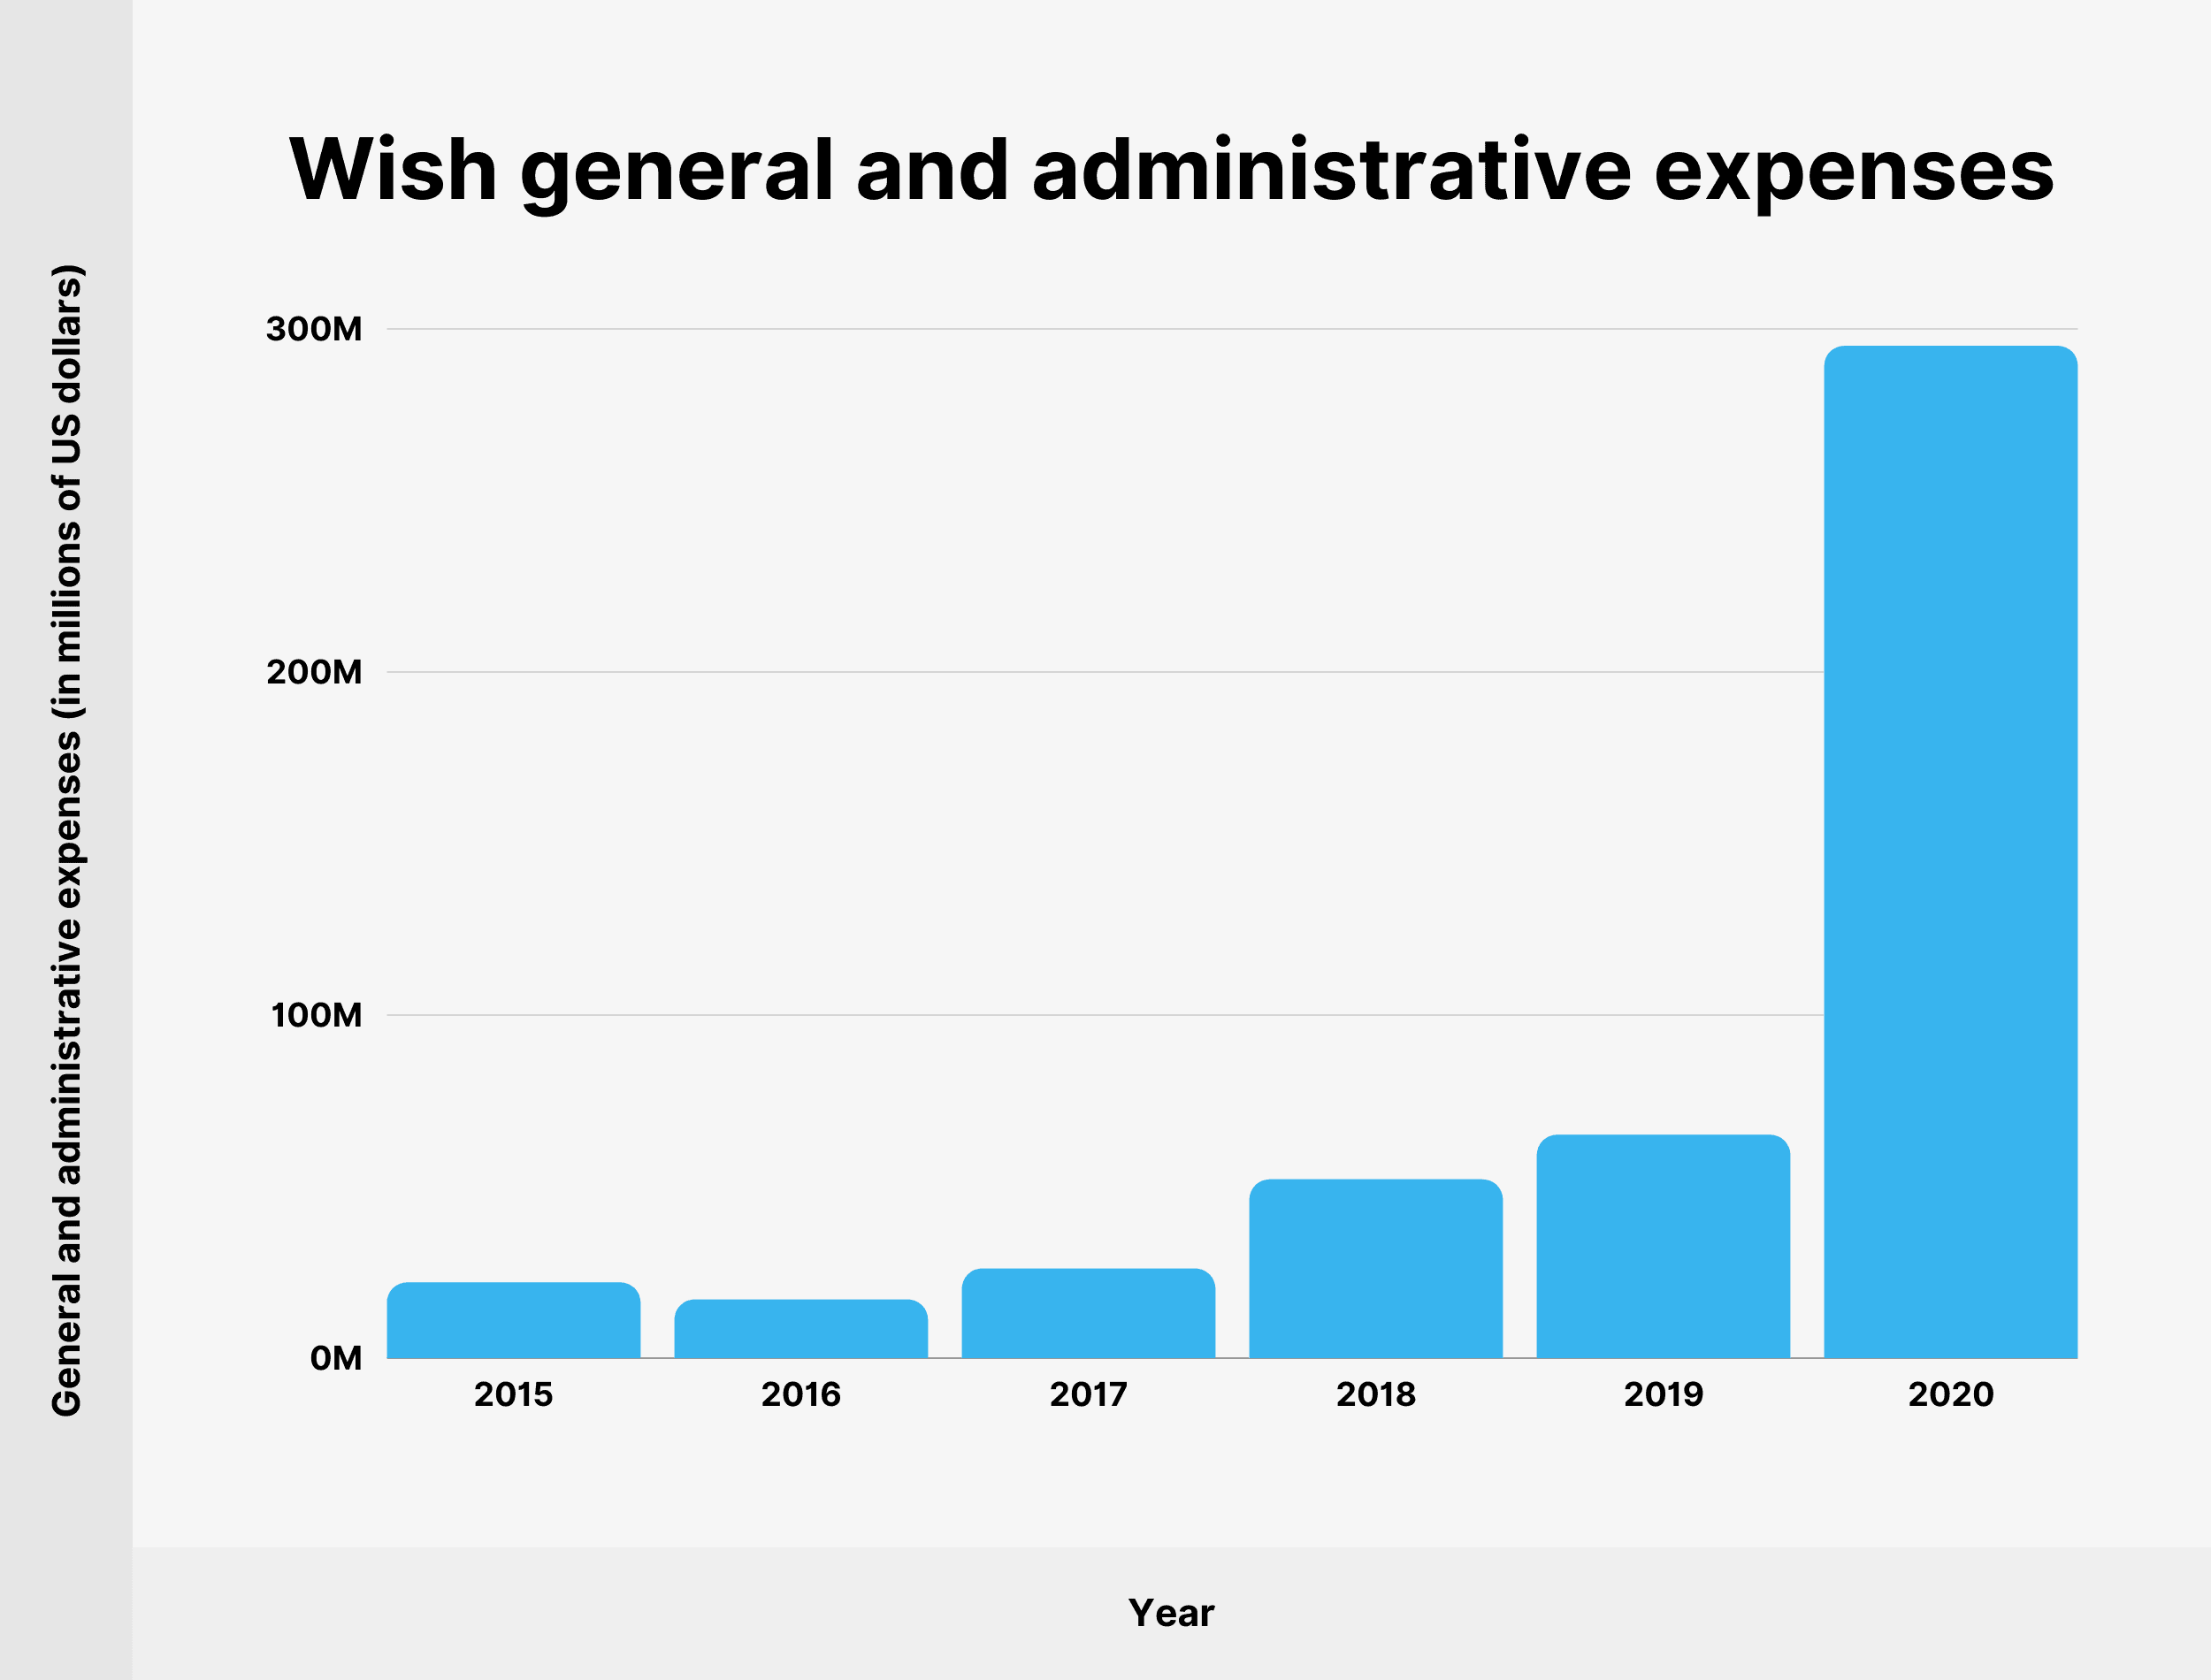 Wish general and administrative expenses